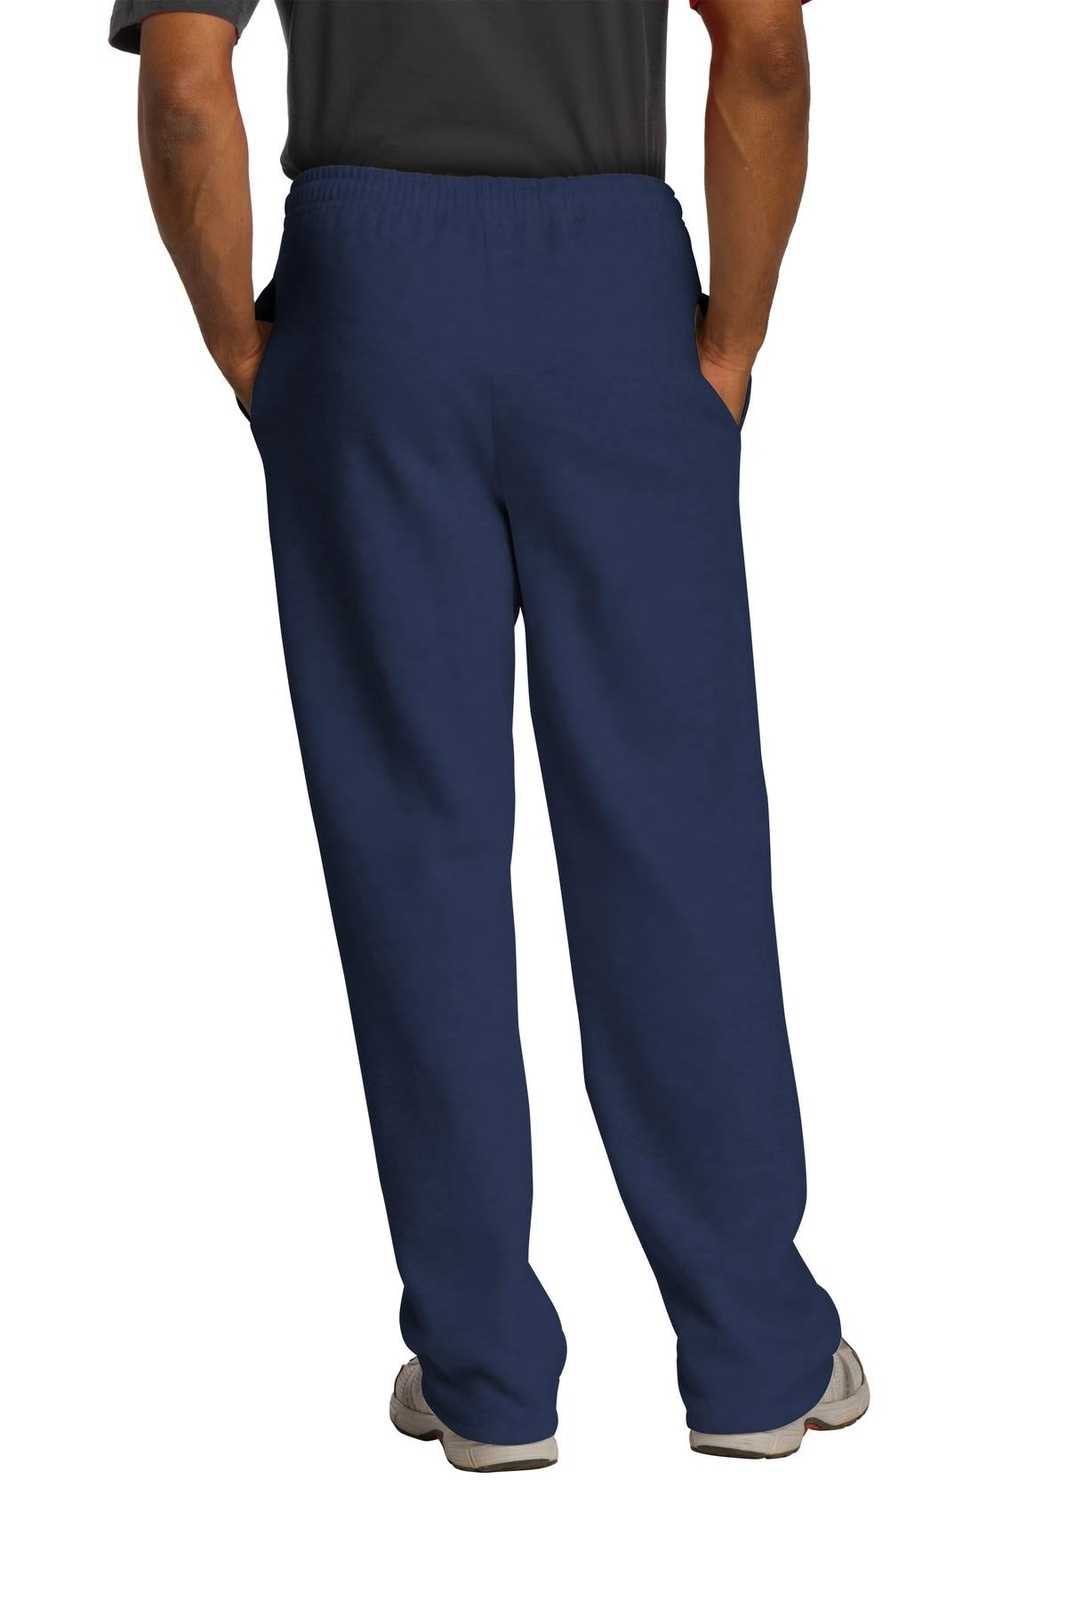 Jerzees 974MP Nublend Open Bottom Pant with Pockets - Navy - HIT a Double